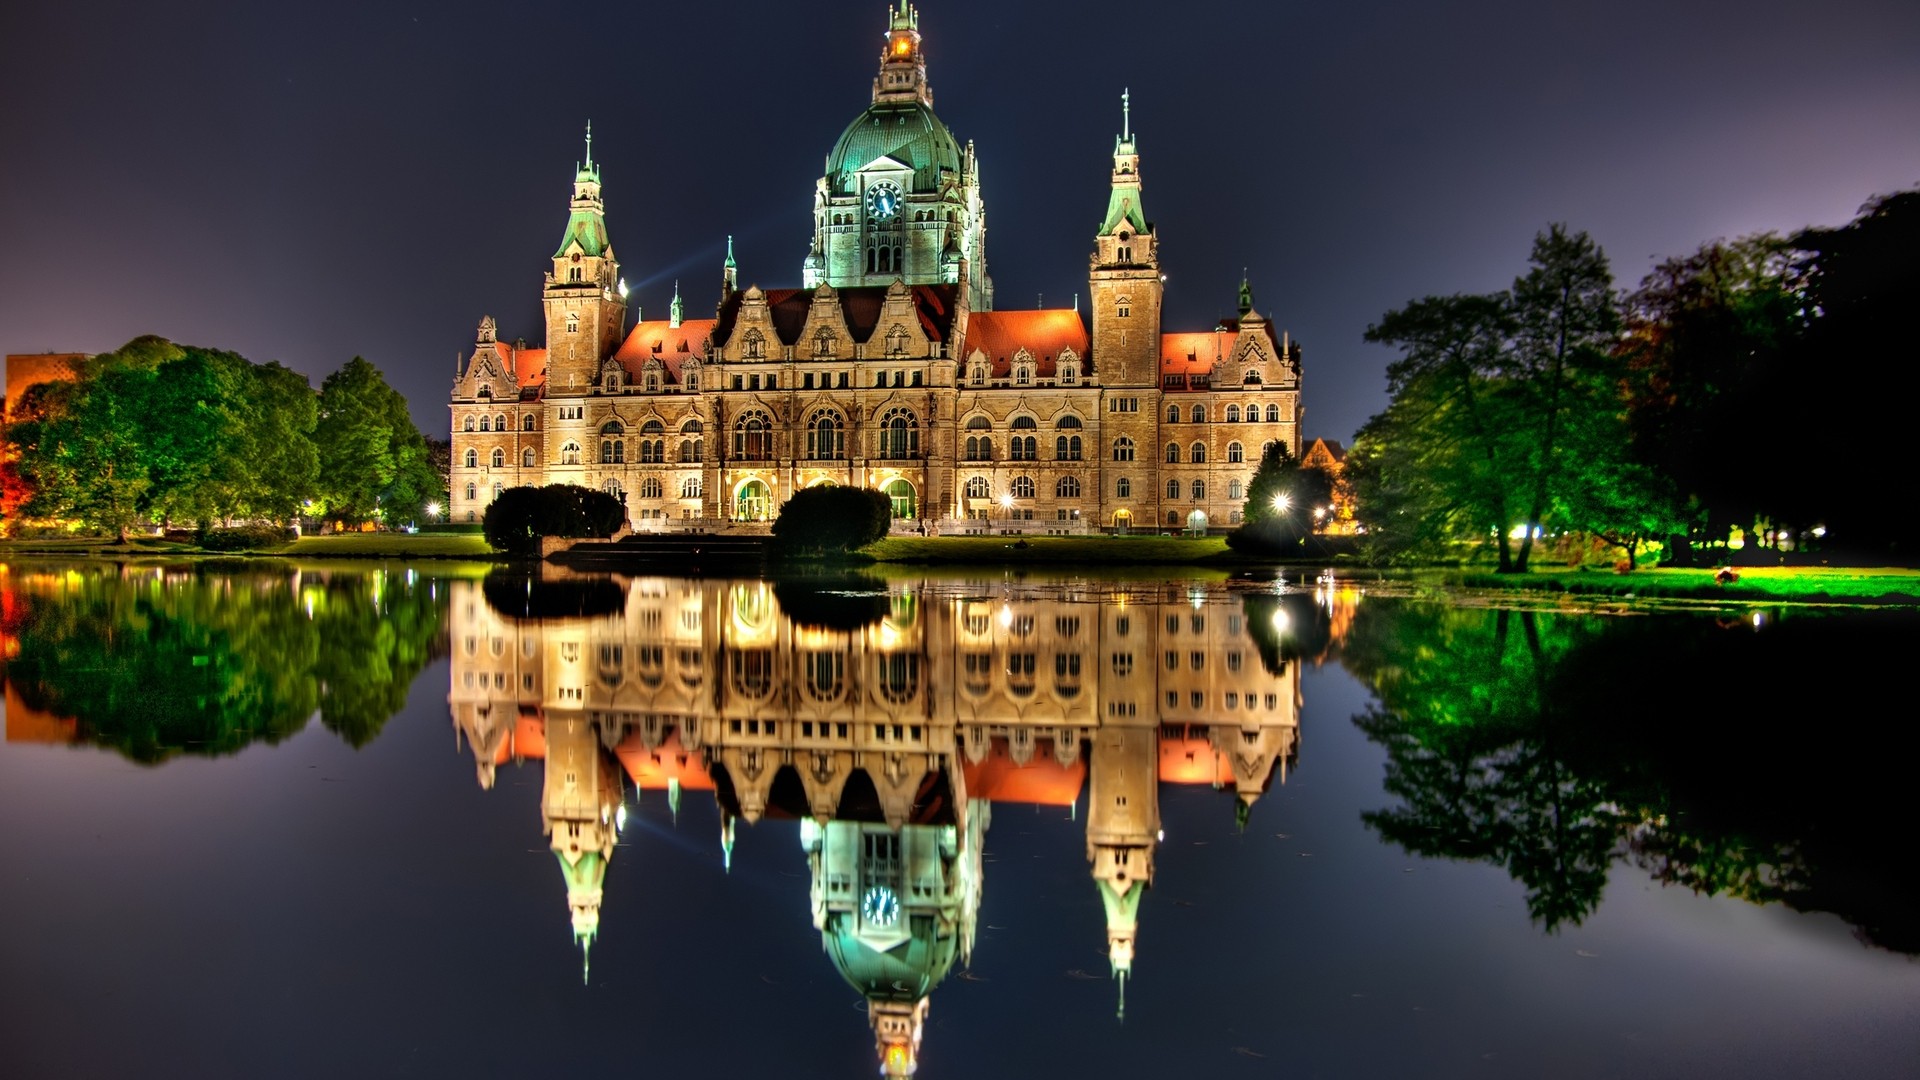 General 1920x1080 architecture city cityscape Germany water old building night lights sky castle lake reflection mirrored clock tower Hanover city hall landscape trees